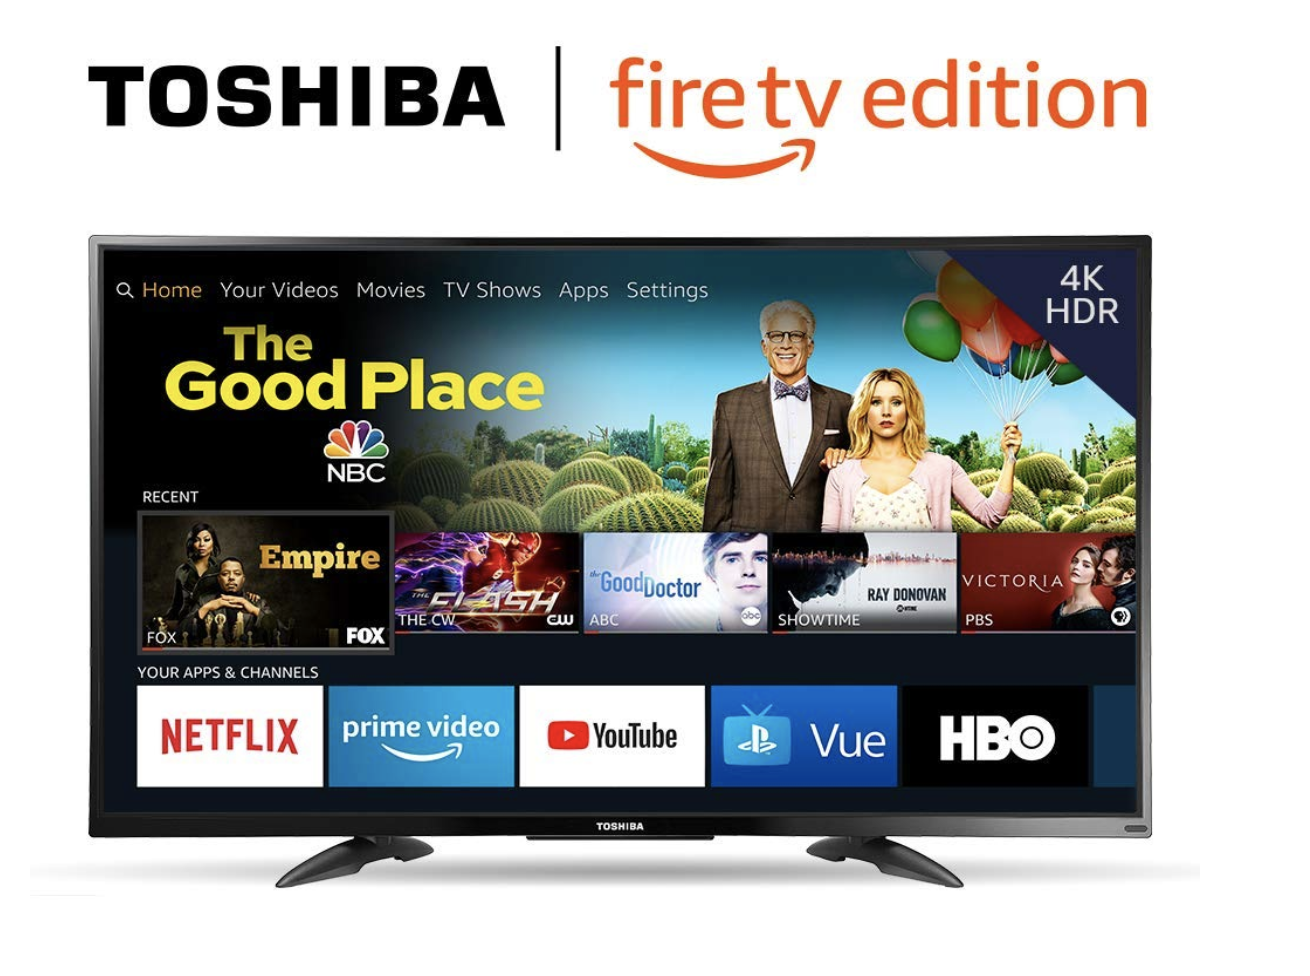 Toshiba Fire TV Edition 50-inch 4K Ultra HD Smart LED TV HDR - $279.99 (Down From $379.99)